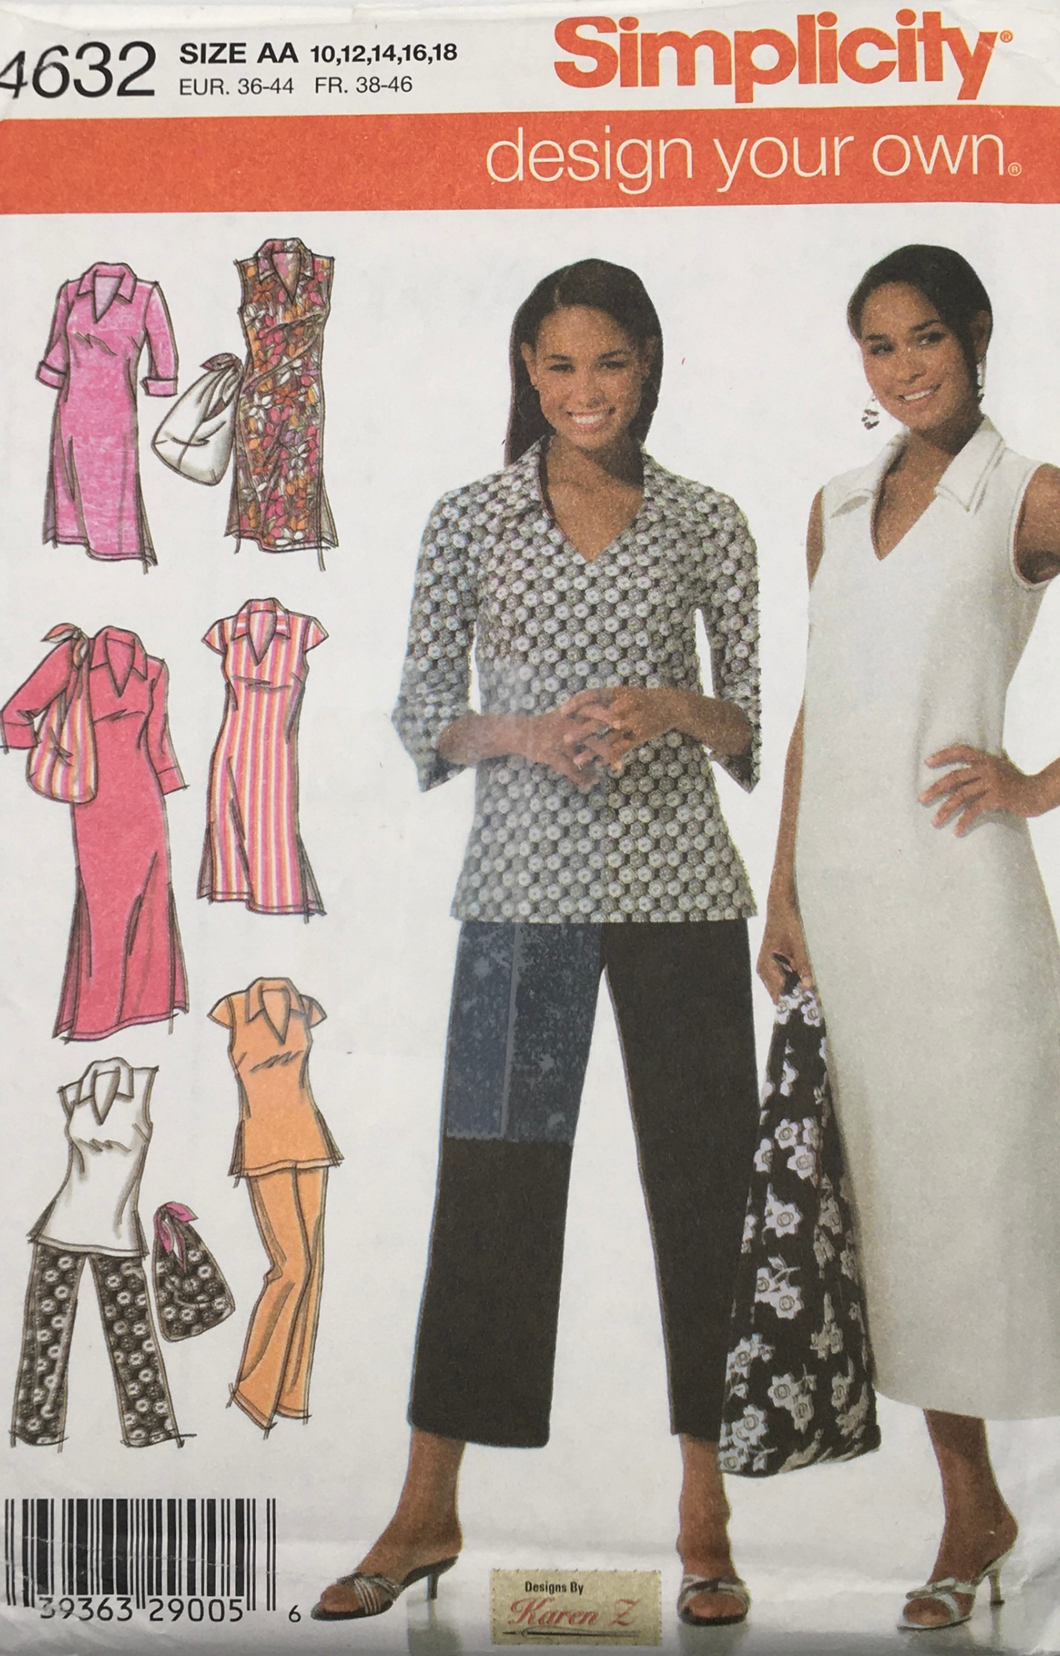 2005 Sewing Pattern: Simplicity 4632